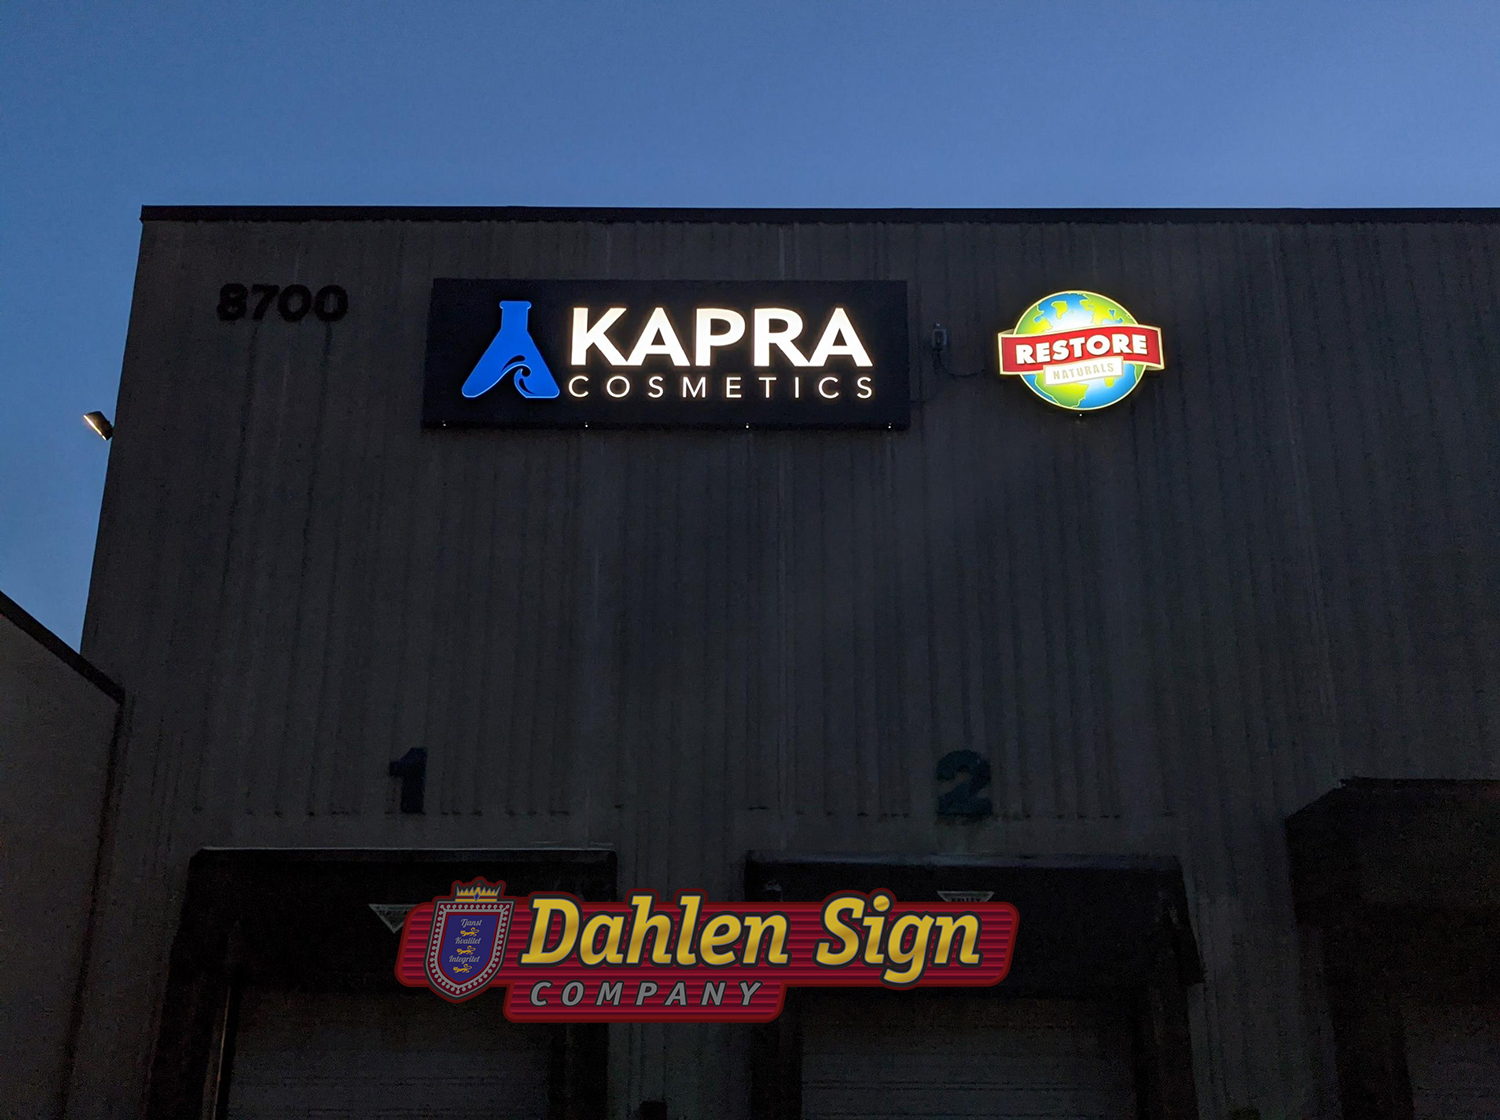 Lighted backlit wall sign made for Kapra Cosmetics